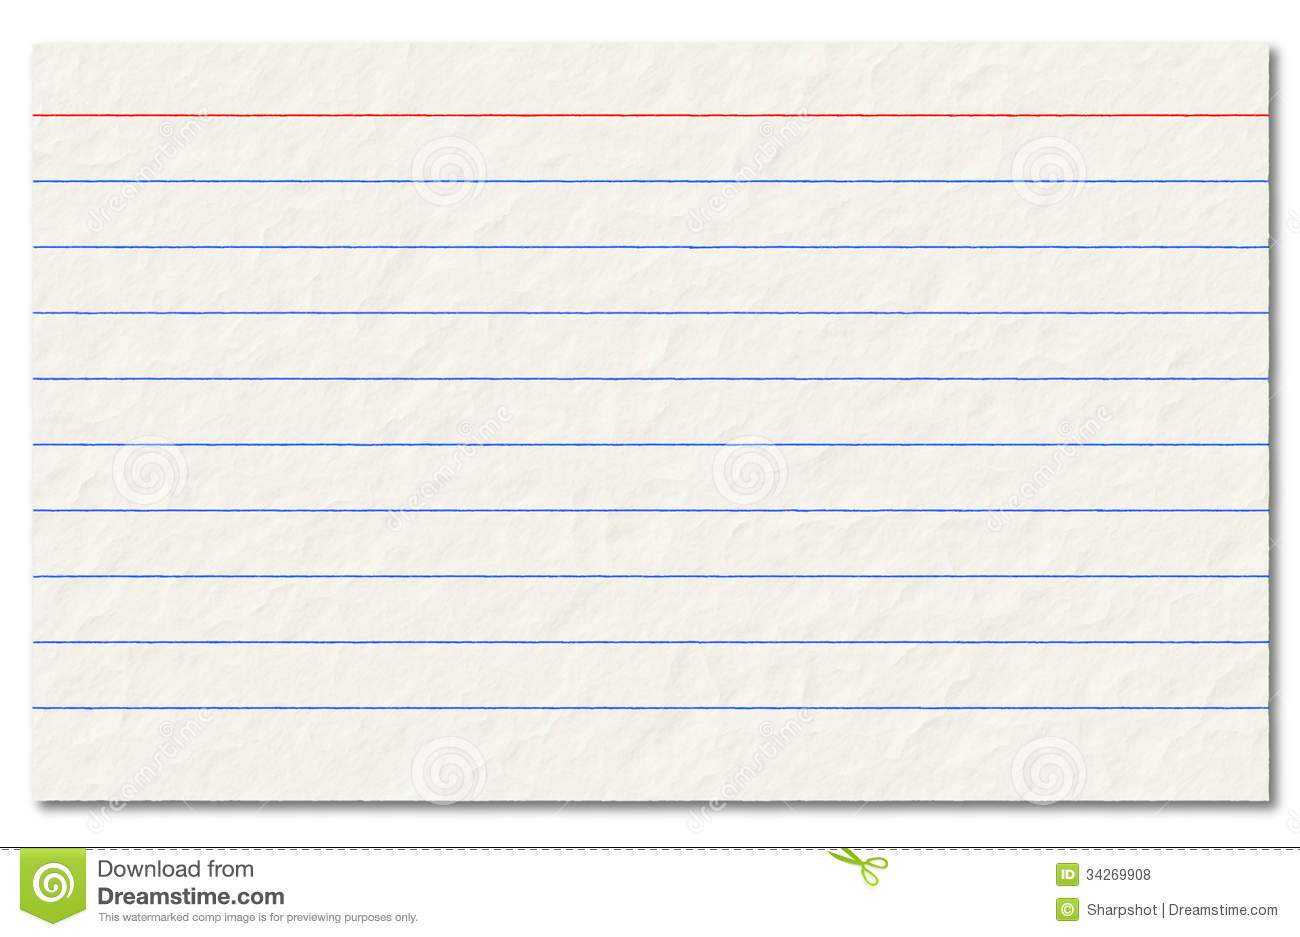 Note Card Clipart With 3X5 Blank Index Card Template